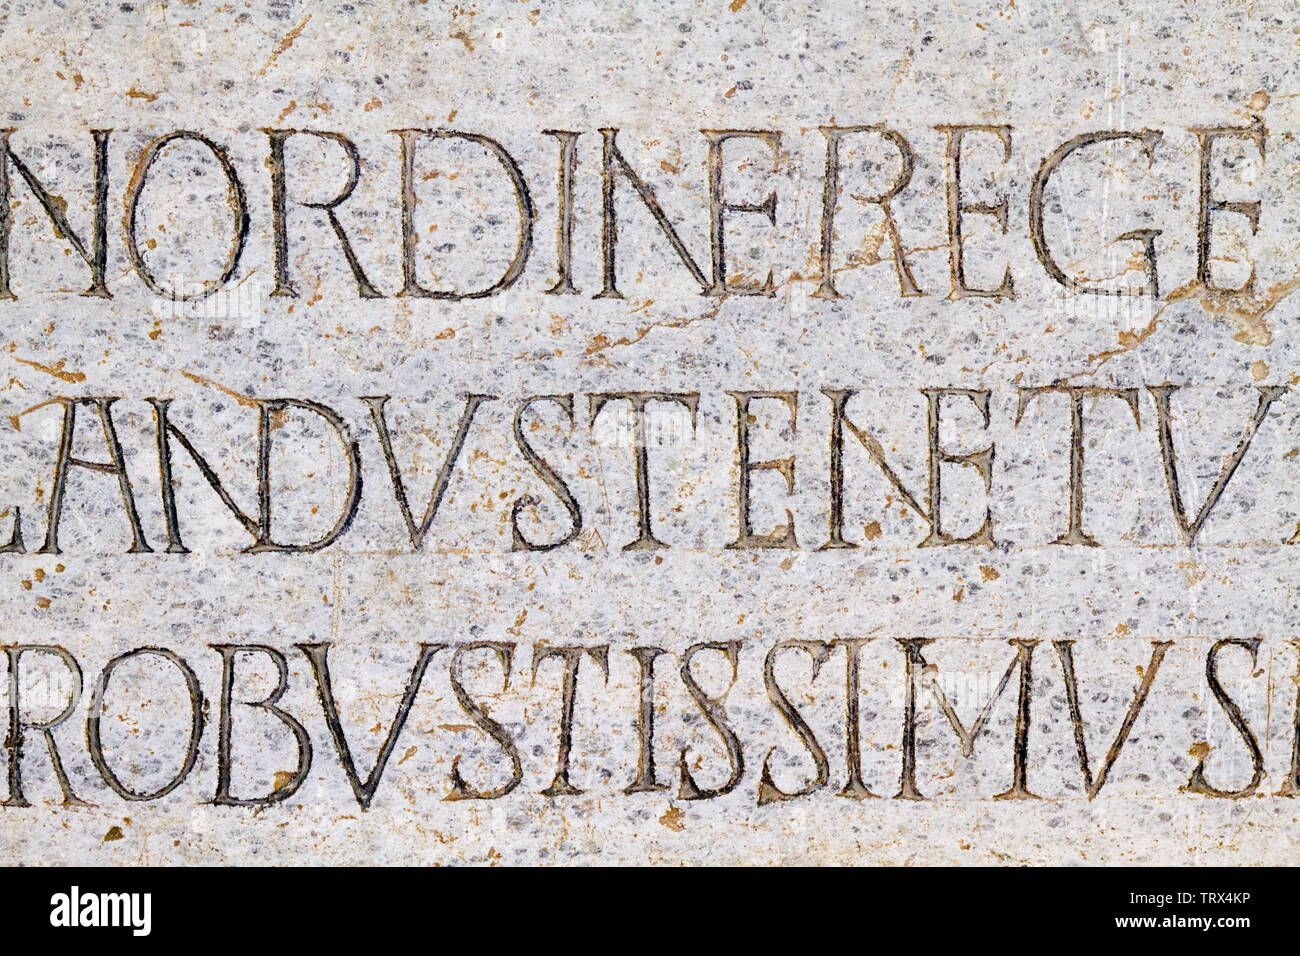 Rythmic epitaph on the marble gravestone of the Lombard King Cuniperto (also called Cuningpert, Cunicpert, Cuninopert) in Castello Visconteo,Pavia,IT. Stock Photo